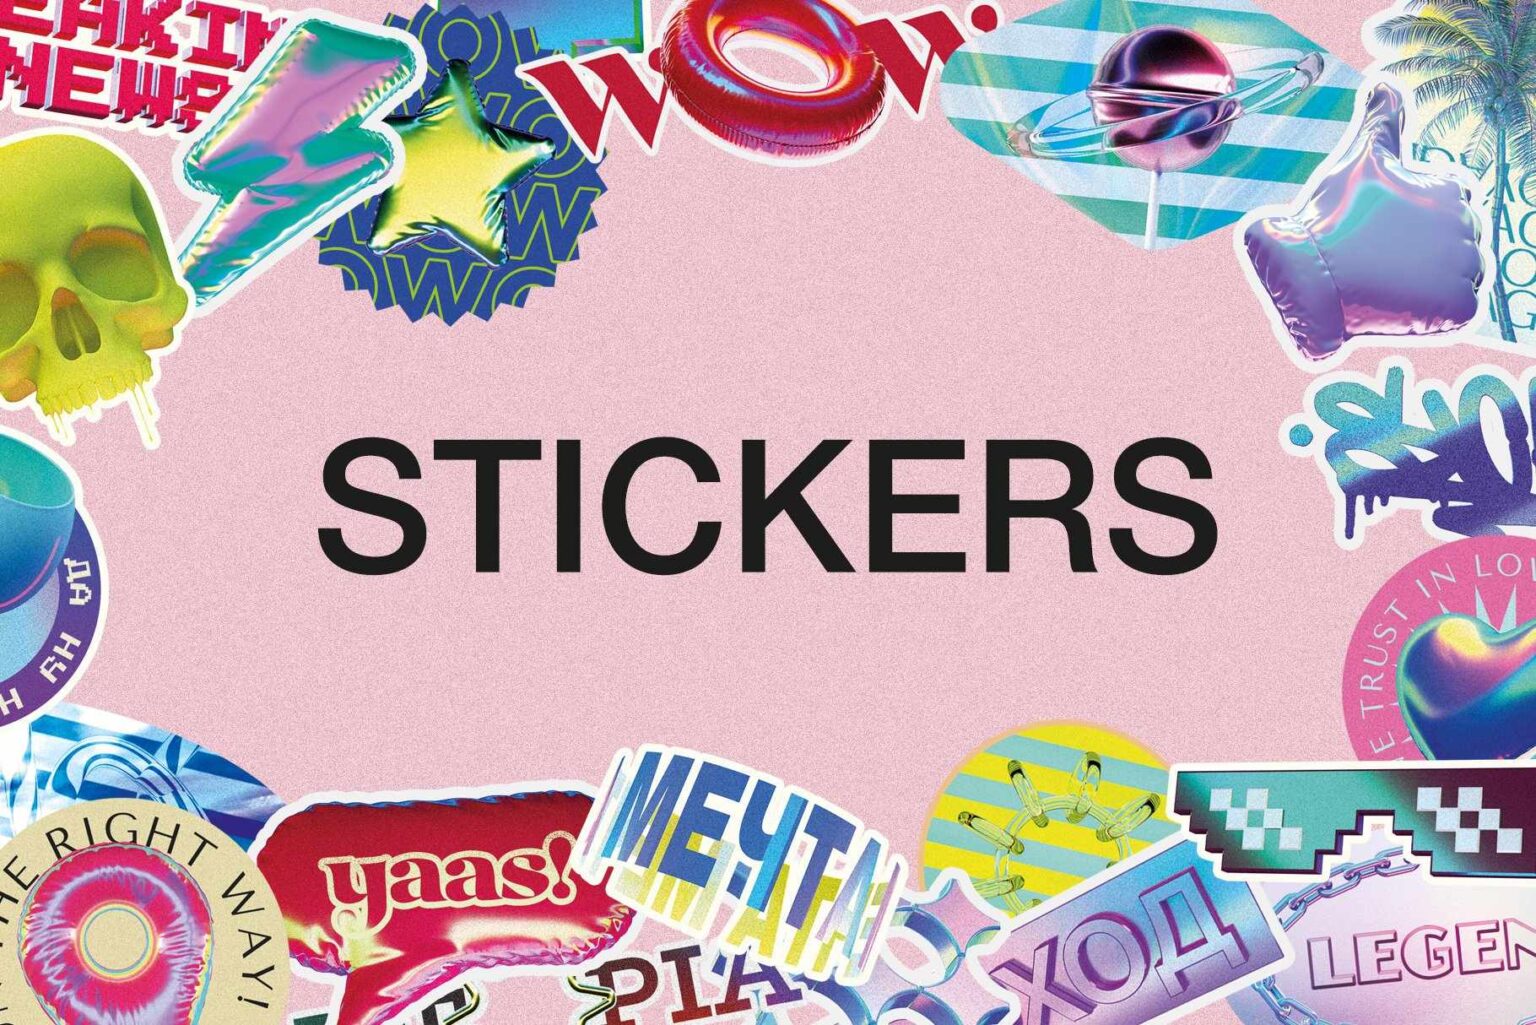 If you want to promote your business, you need to stand out. There's an effective way to put your name out there on the cheap! Give stickers a try today!